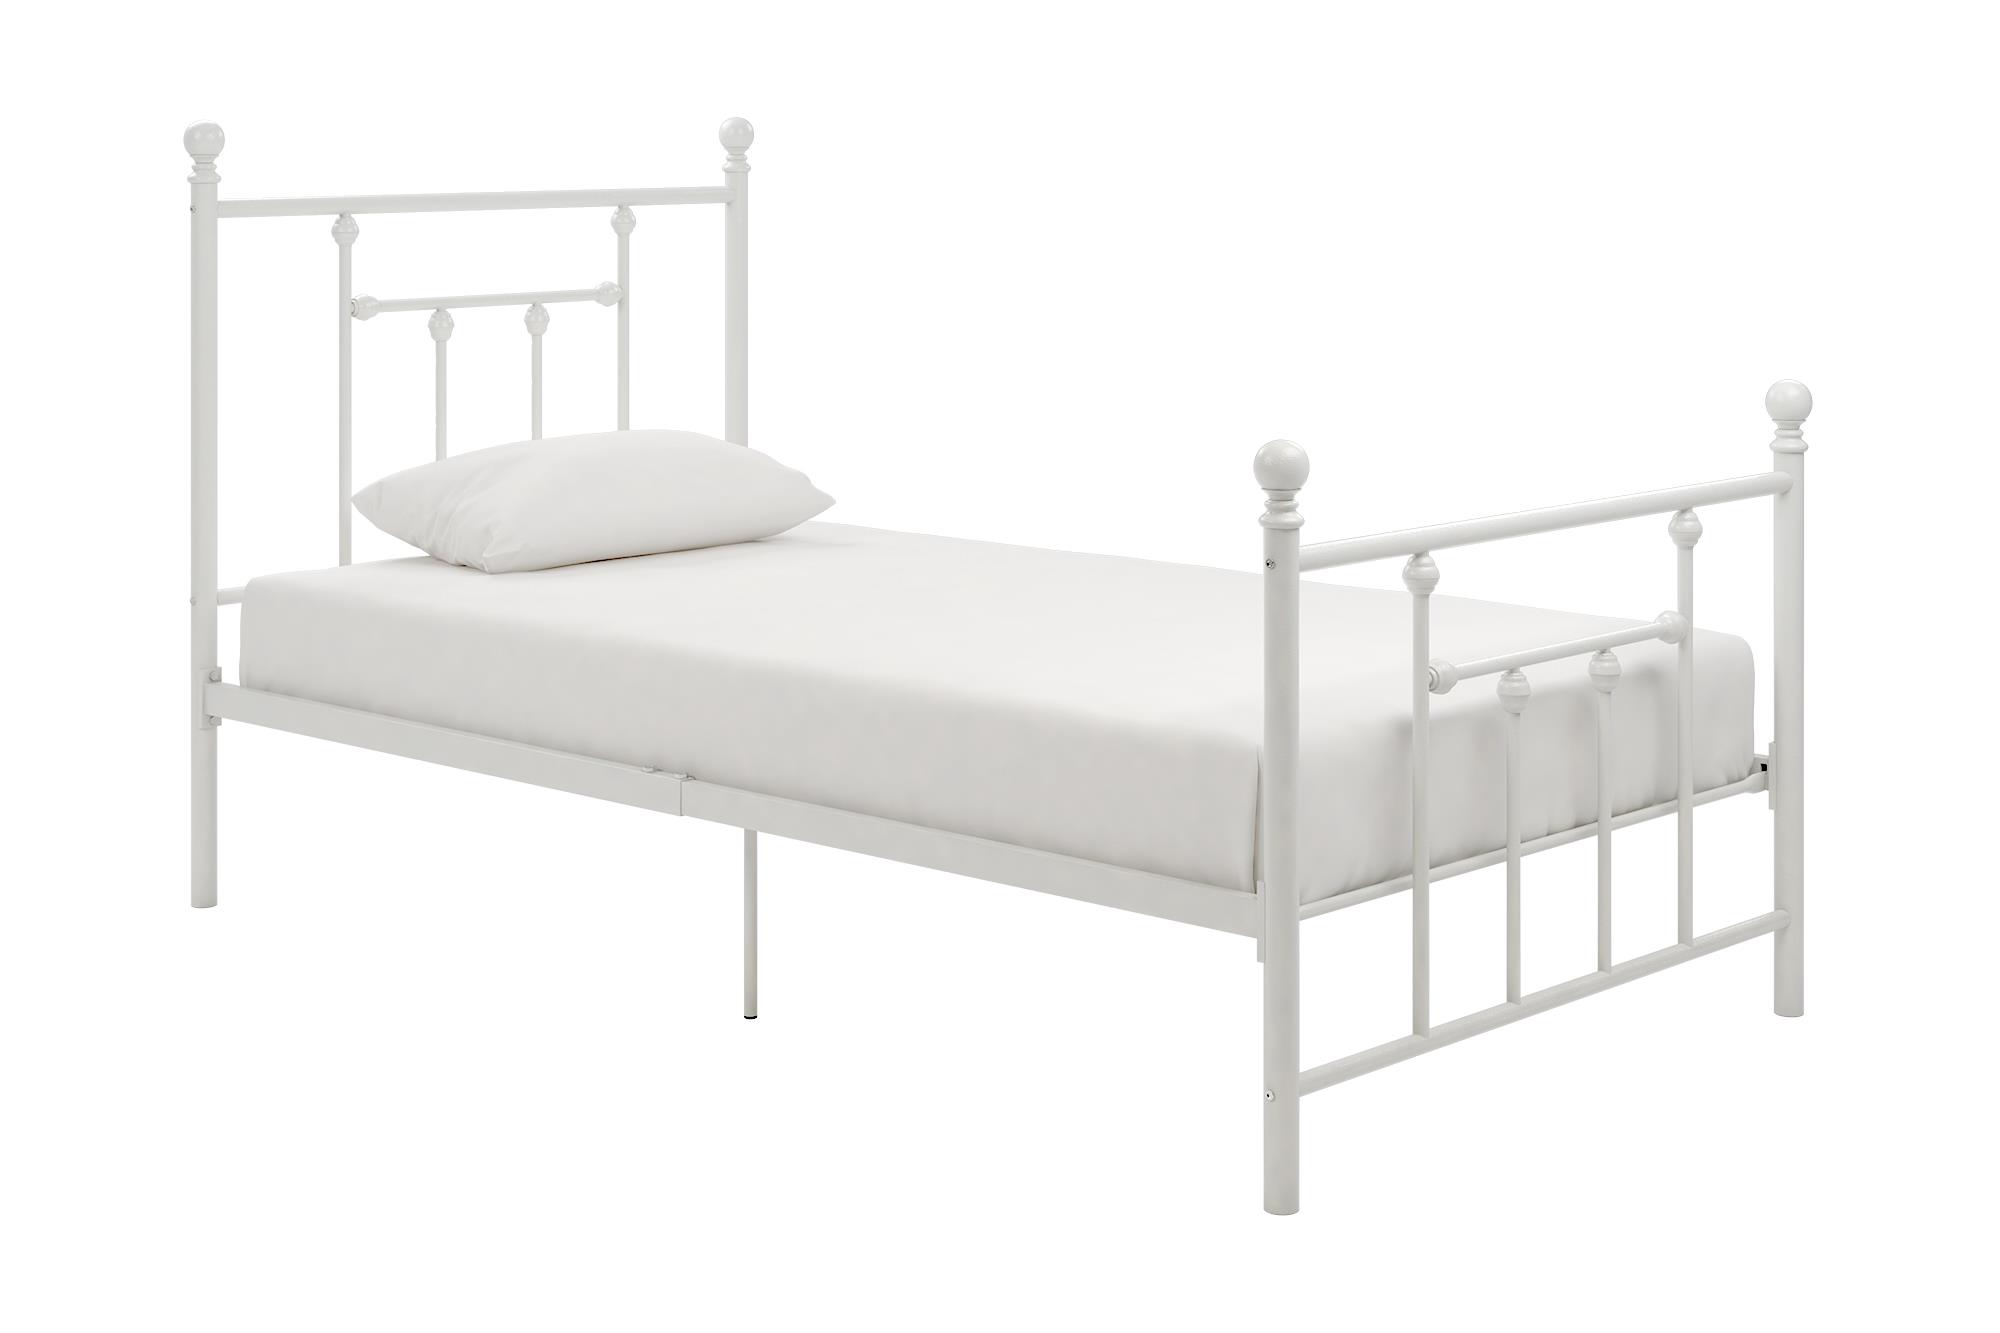 DHP Manila Metal Platform Bed with Adjustable Height, Twin, White - image 3 of 21